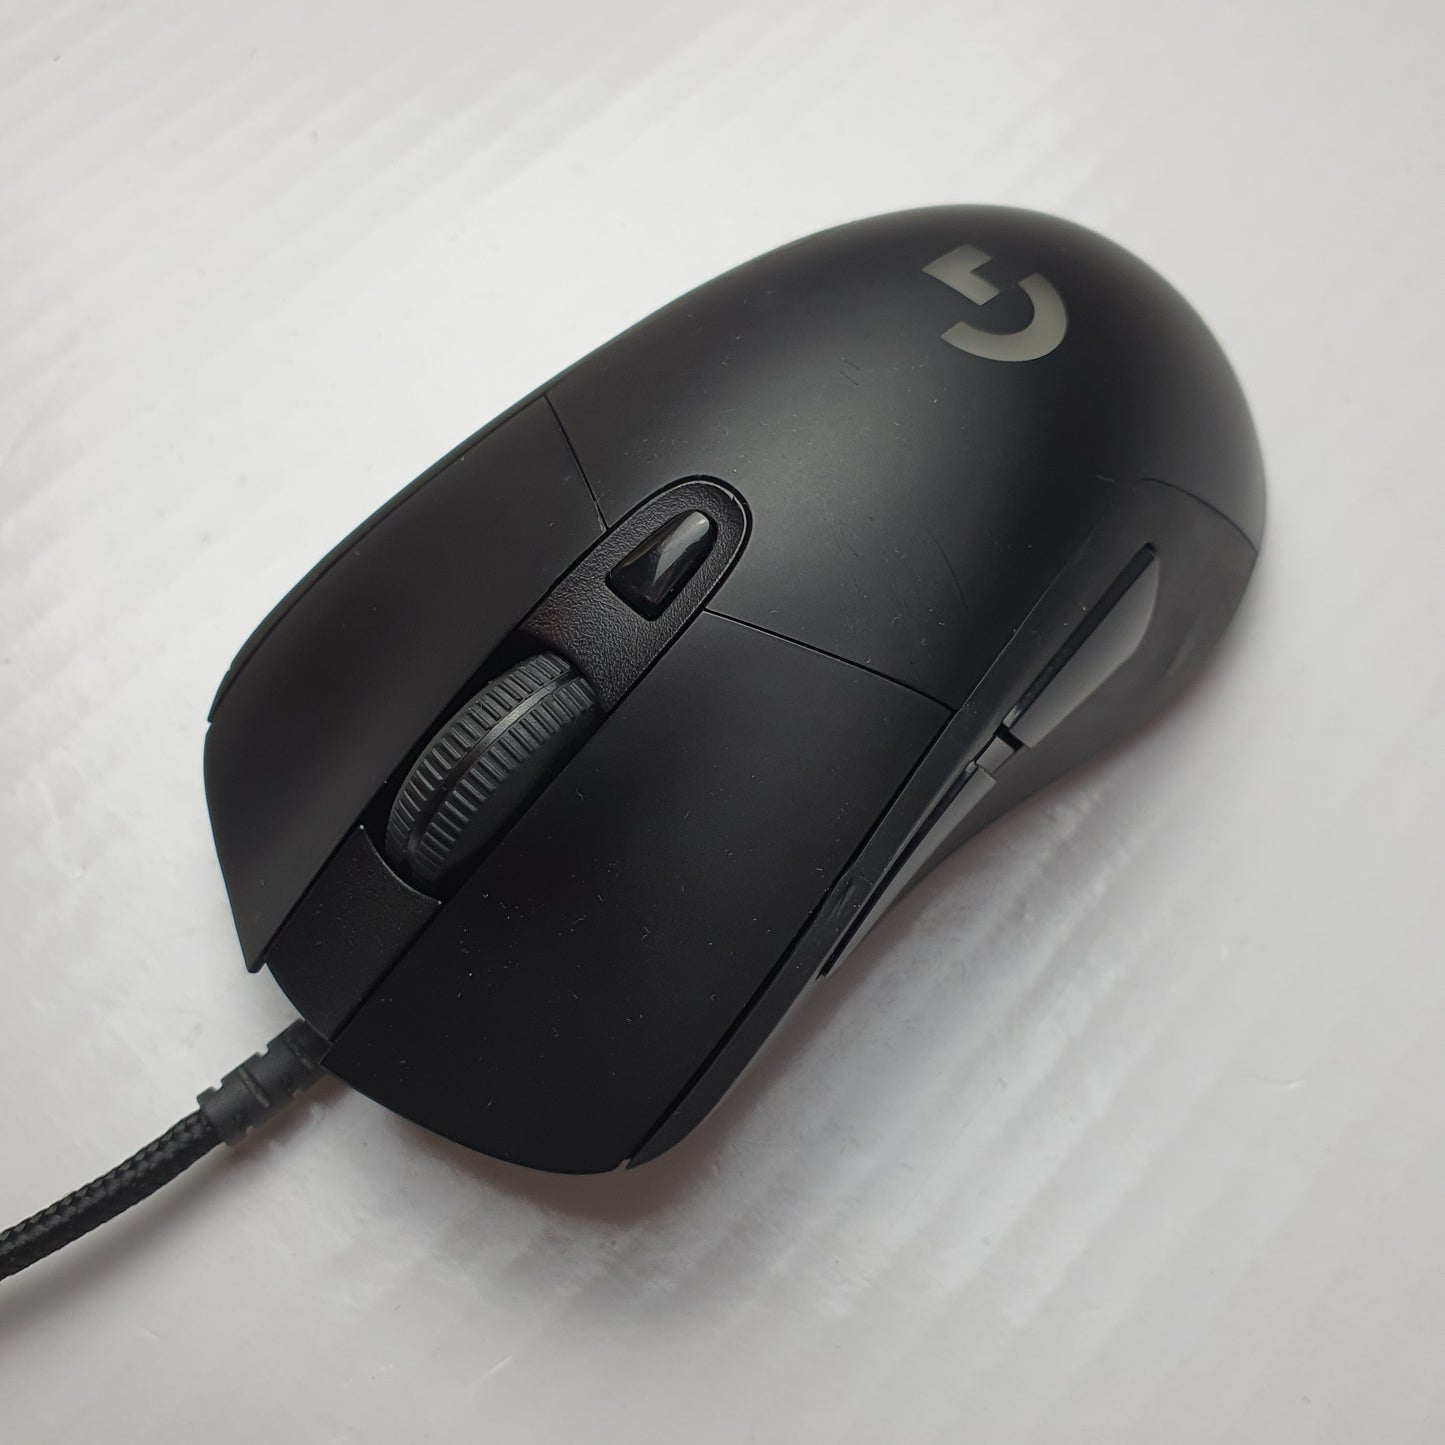 Logitech G403 Wired Gaming Mouse